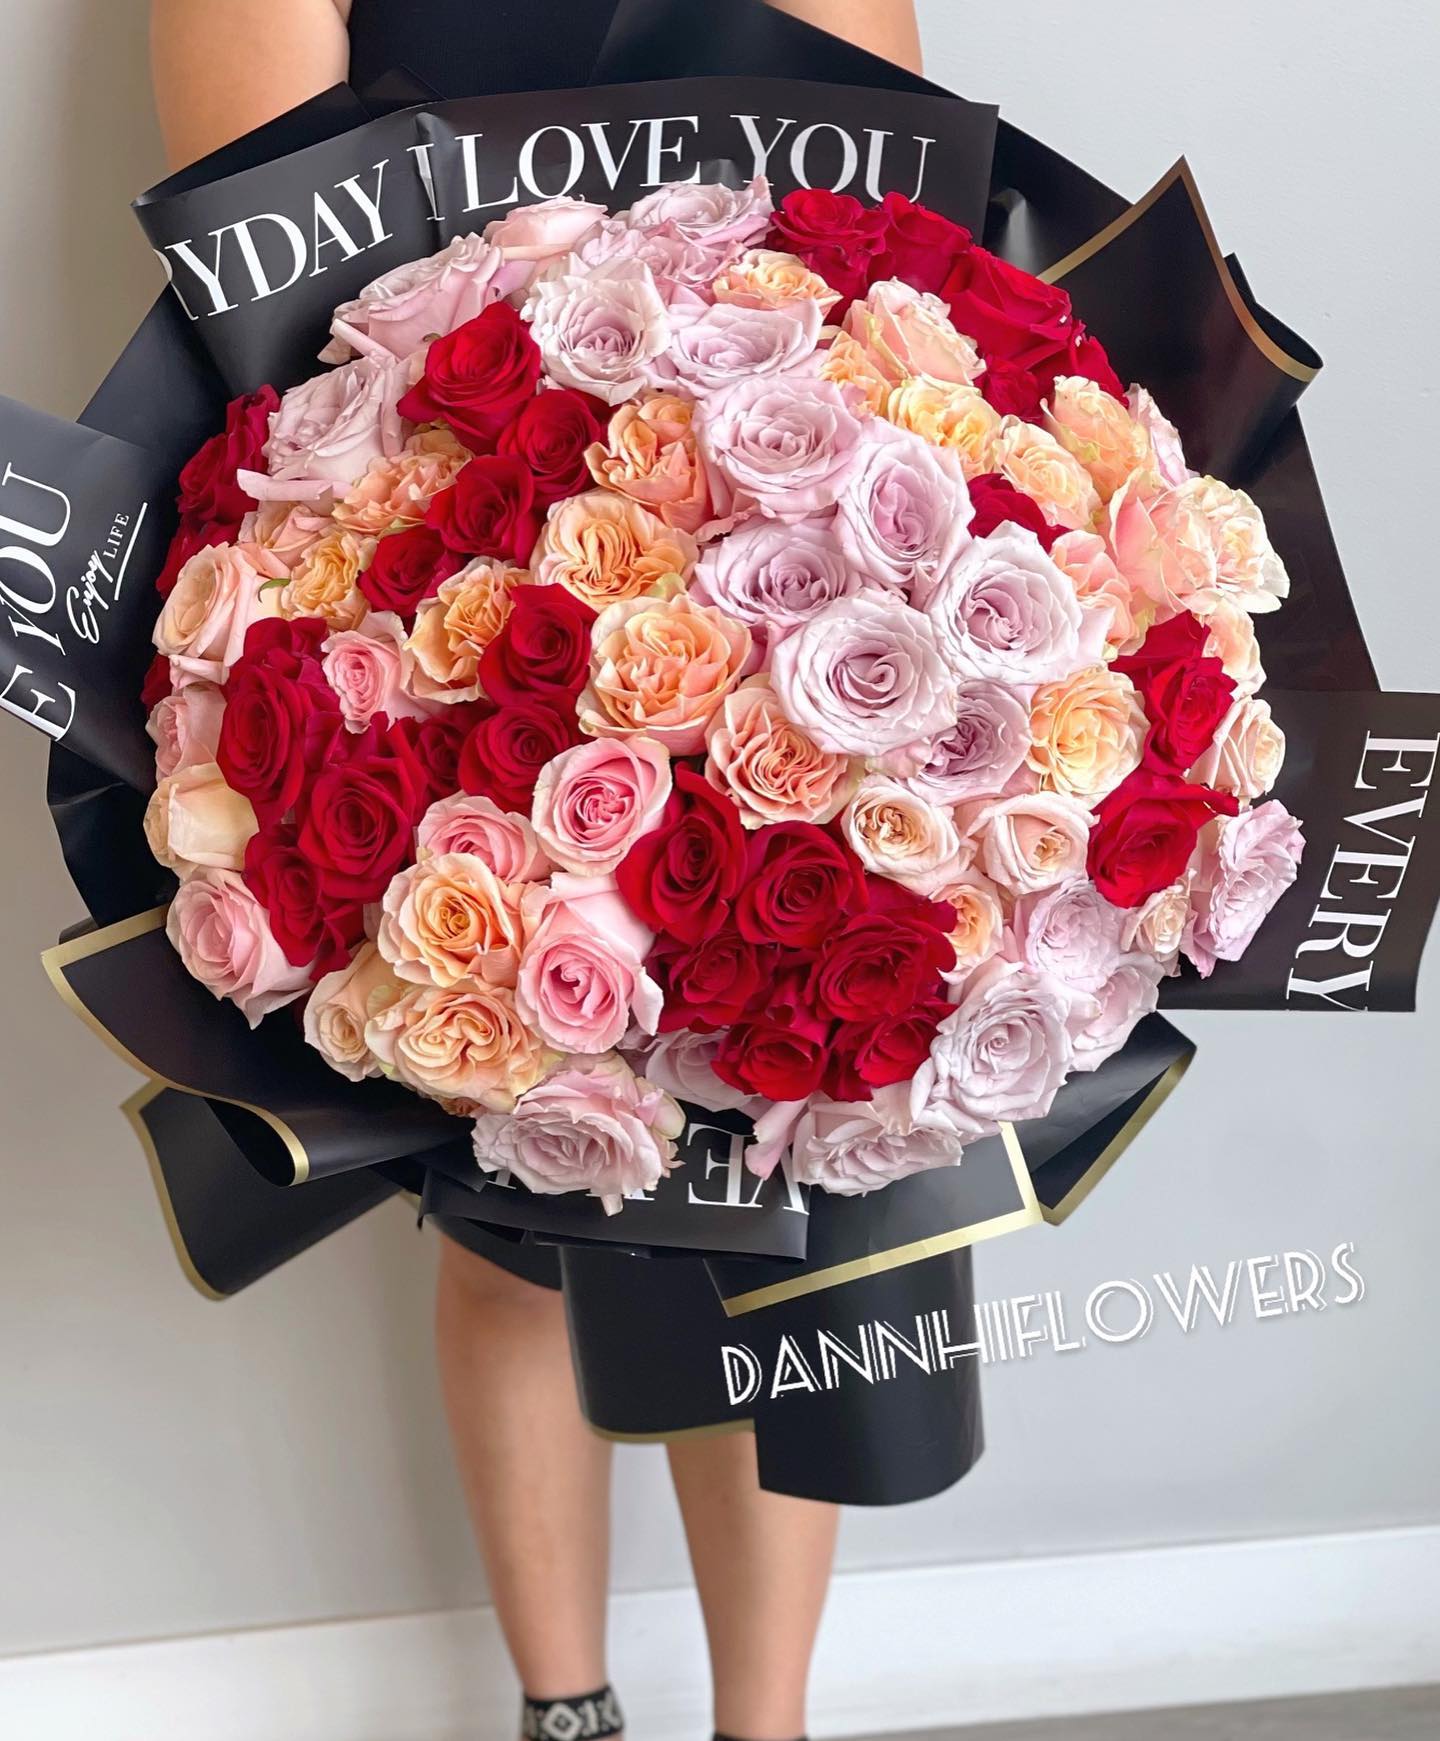 Ravishing beauty - 99 roses mix bouquet. You can choose your own flowers color combo. 